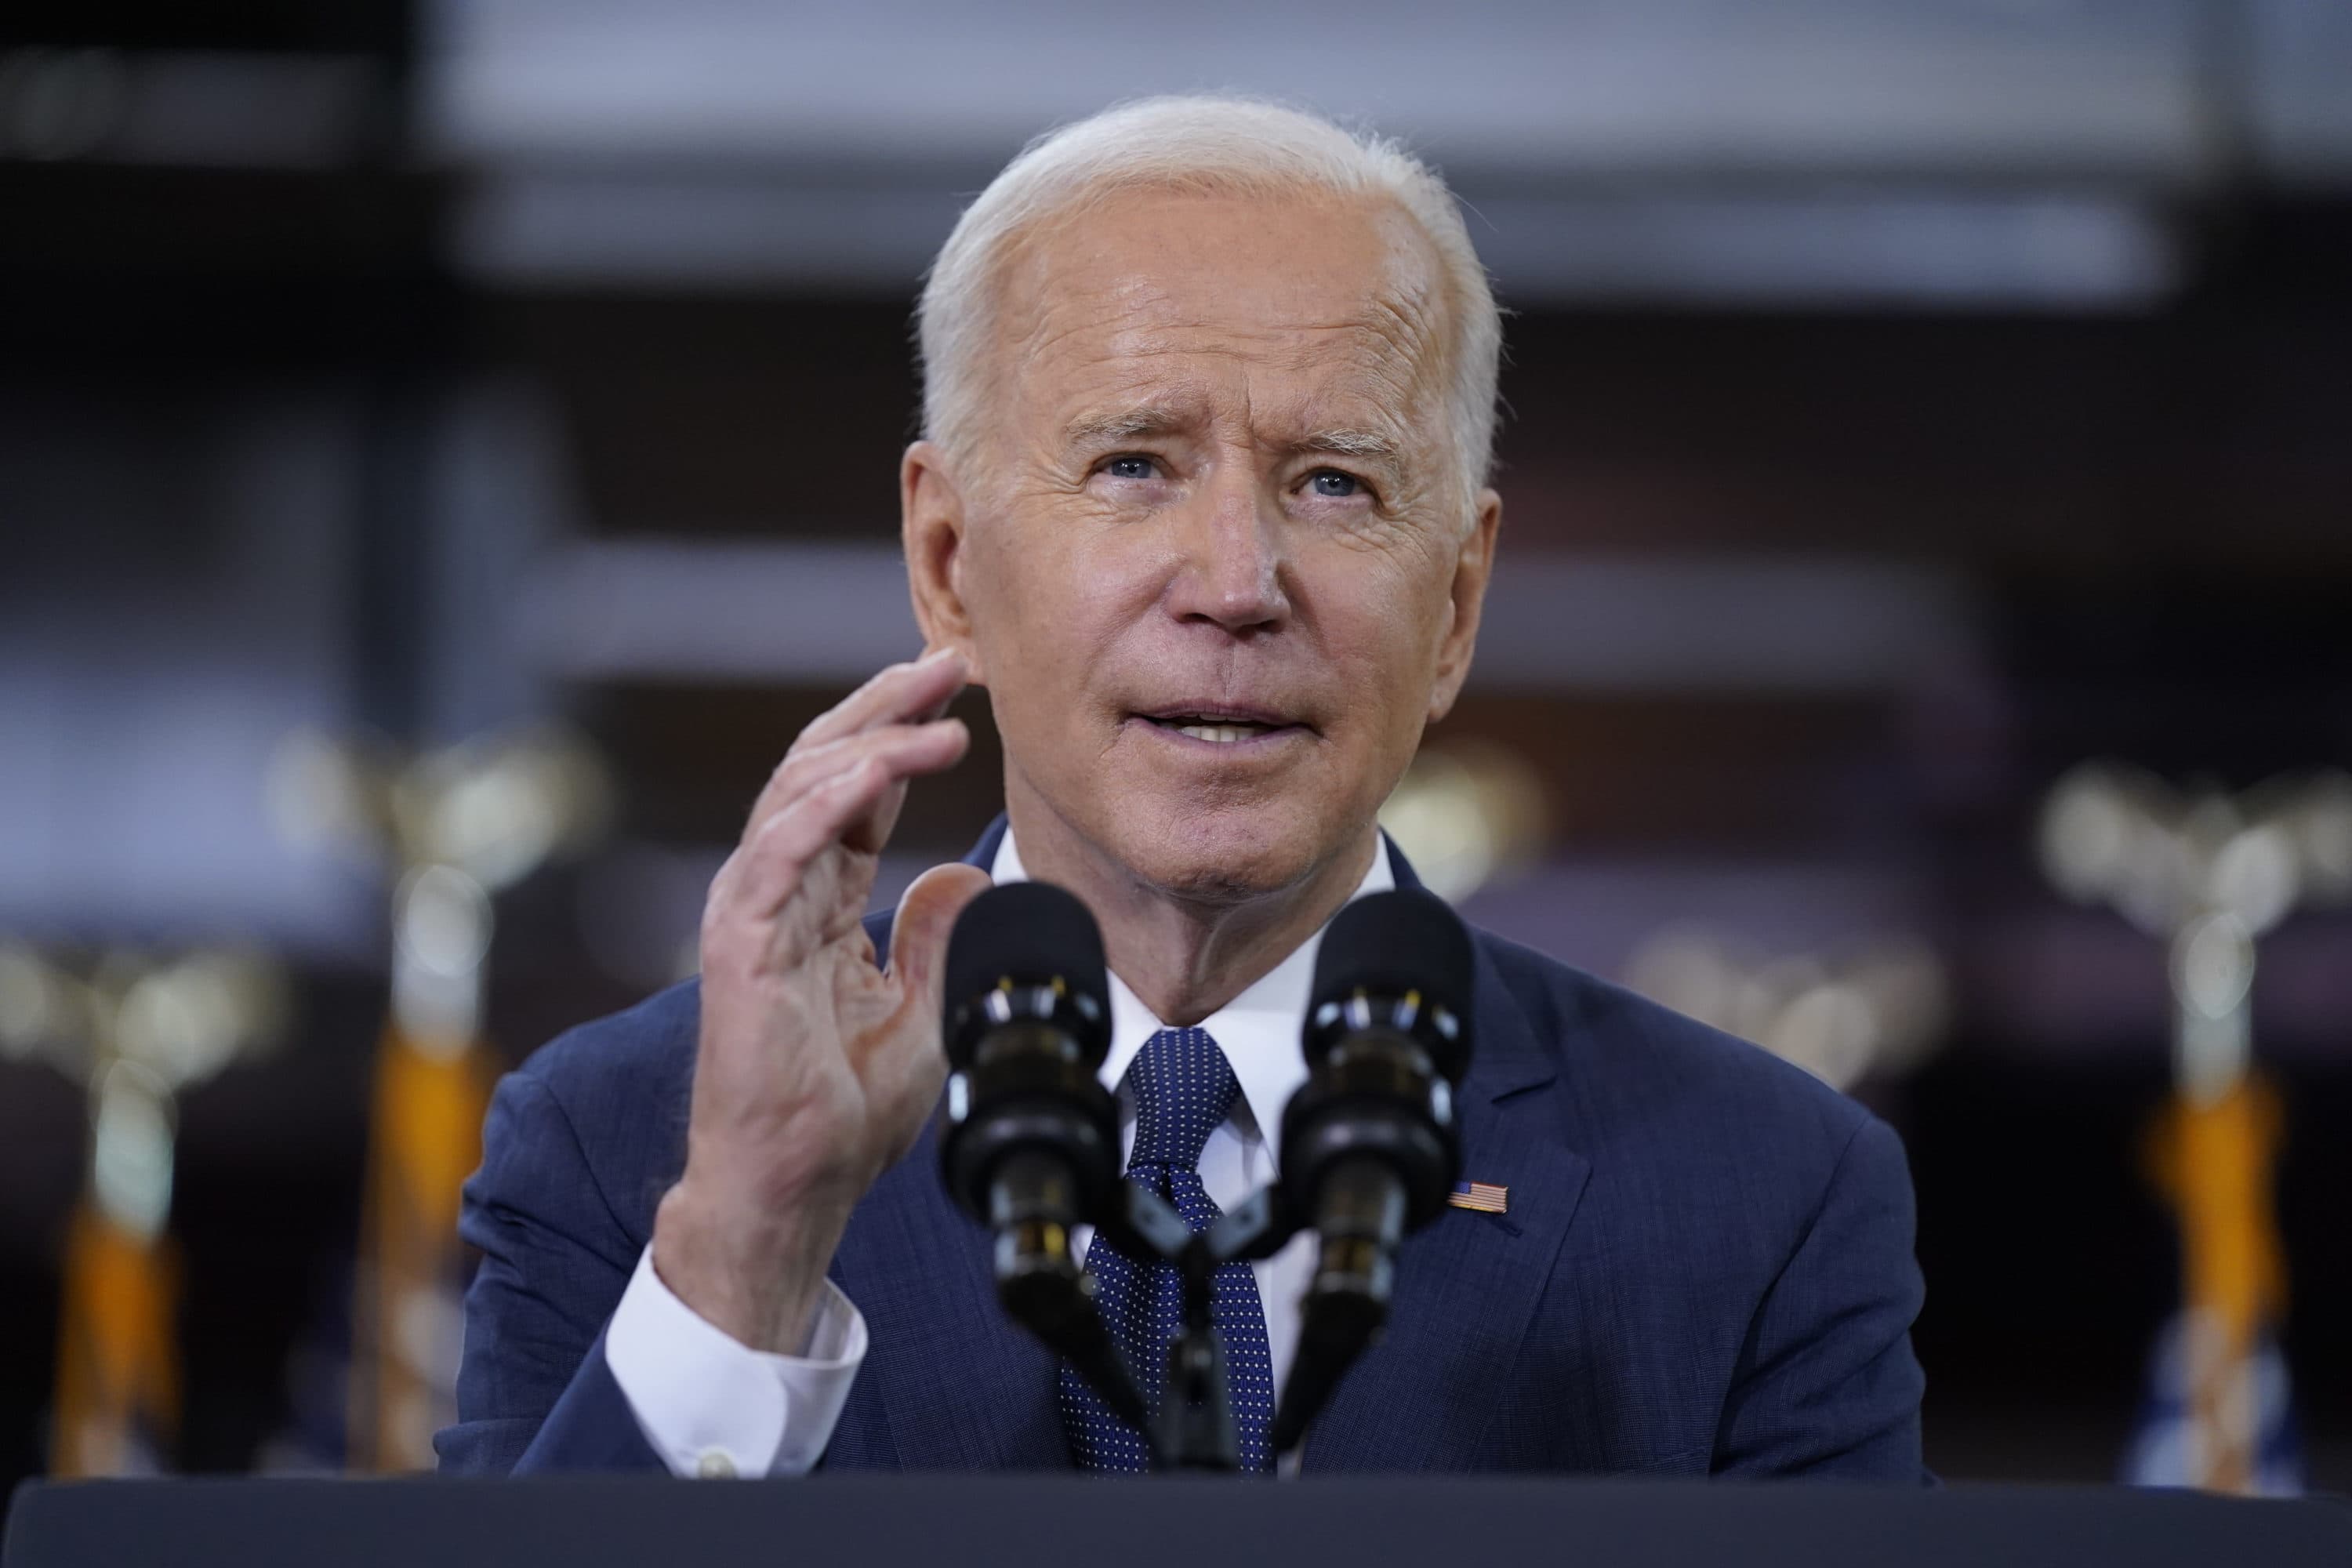 President Joe Biden delivers a speech on infrastructure spending at Carpenters Pittsburgh Training Center in Pittsburgh on March 31, 2021. (Evan Vucci/AP)